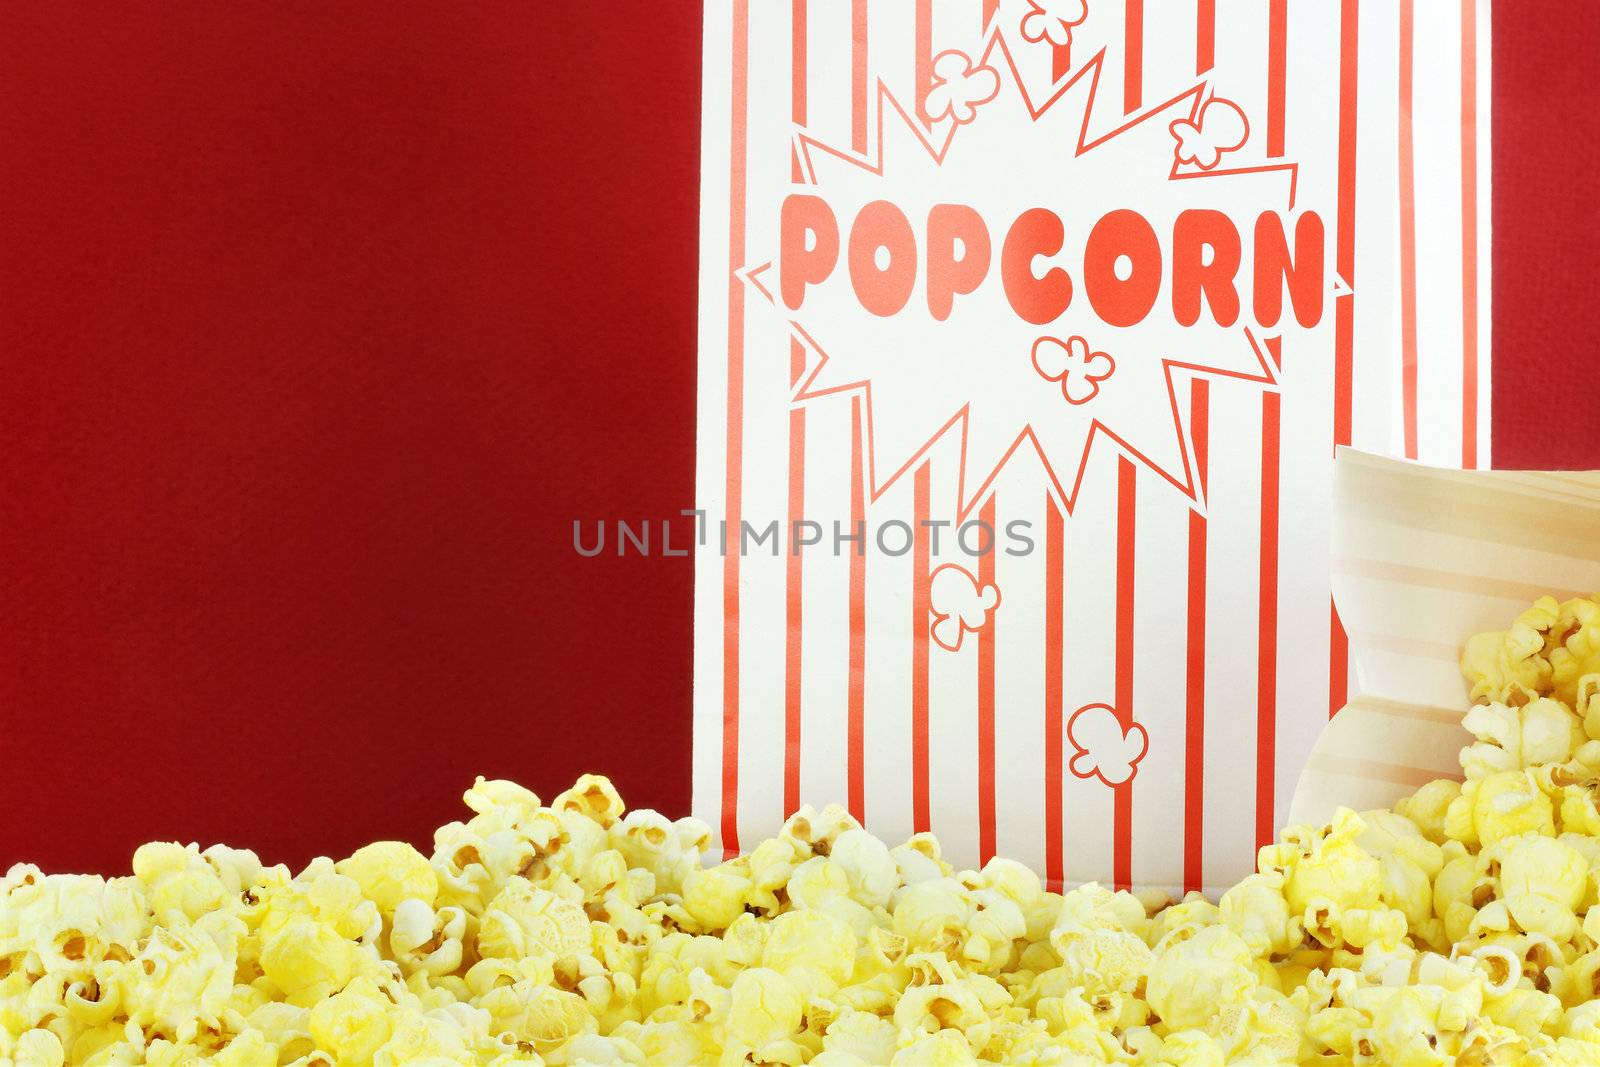 Bags of buttery popcorn against a red background. Room for text.

